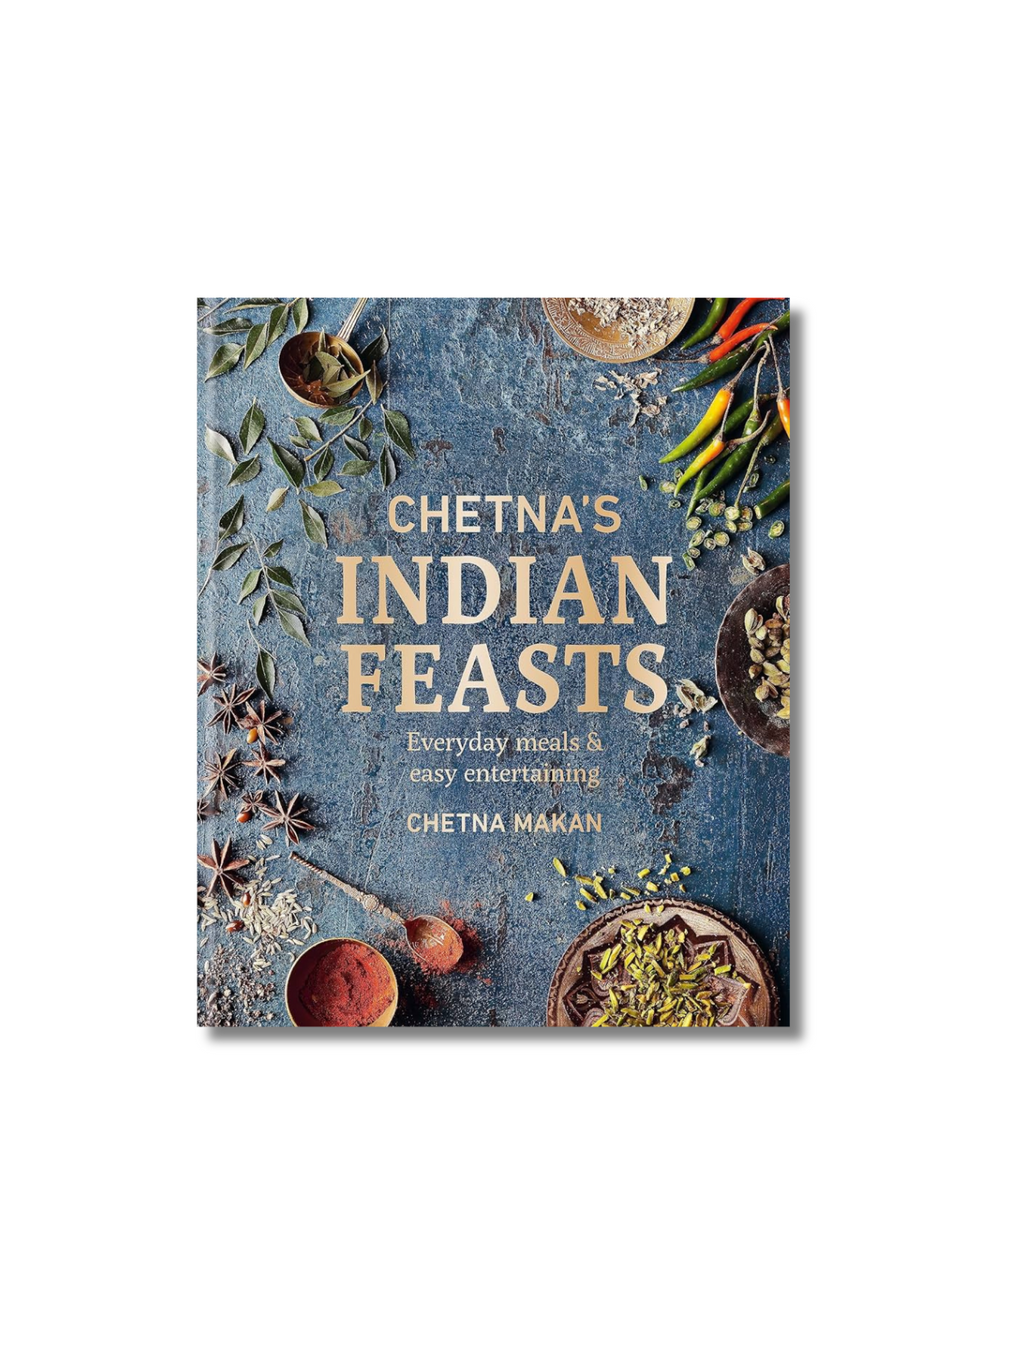 Chetna's Indian Feasts